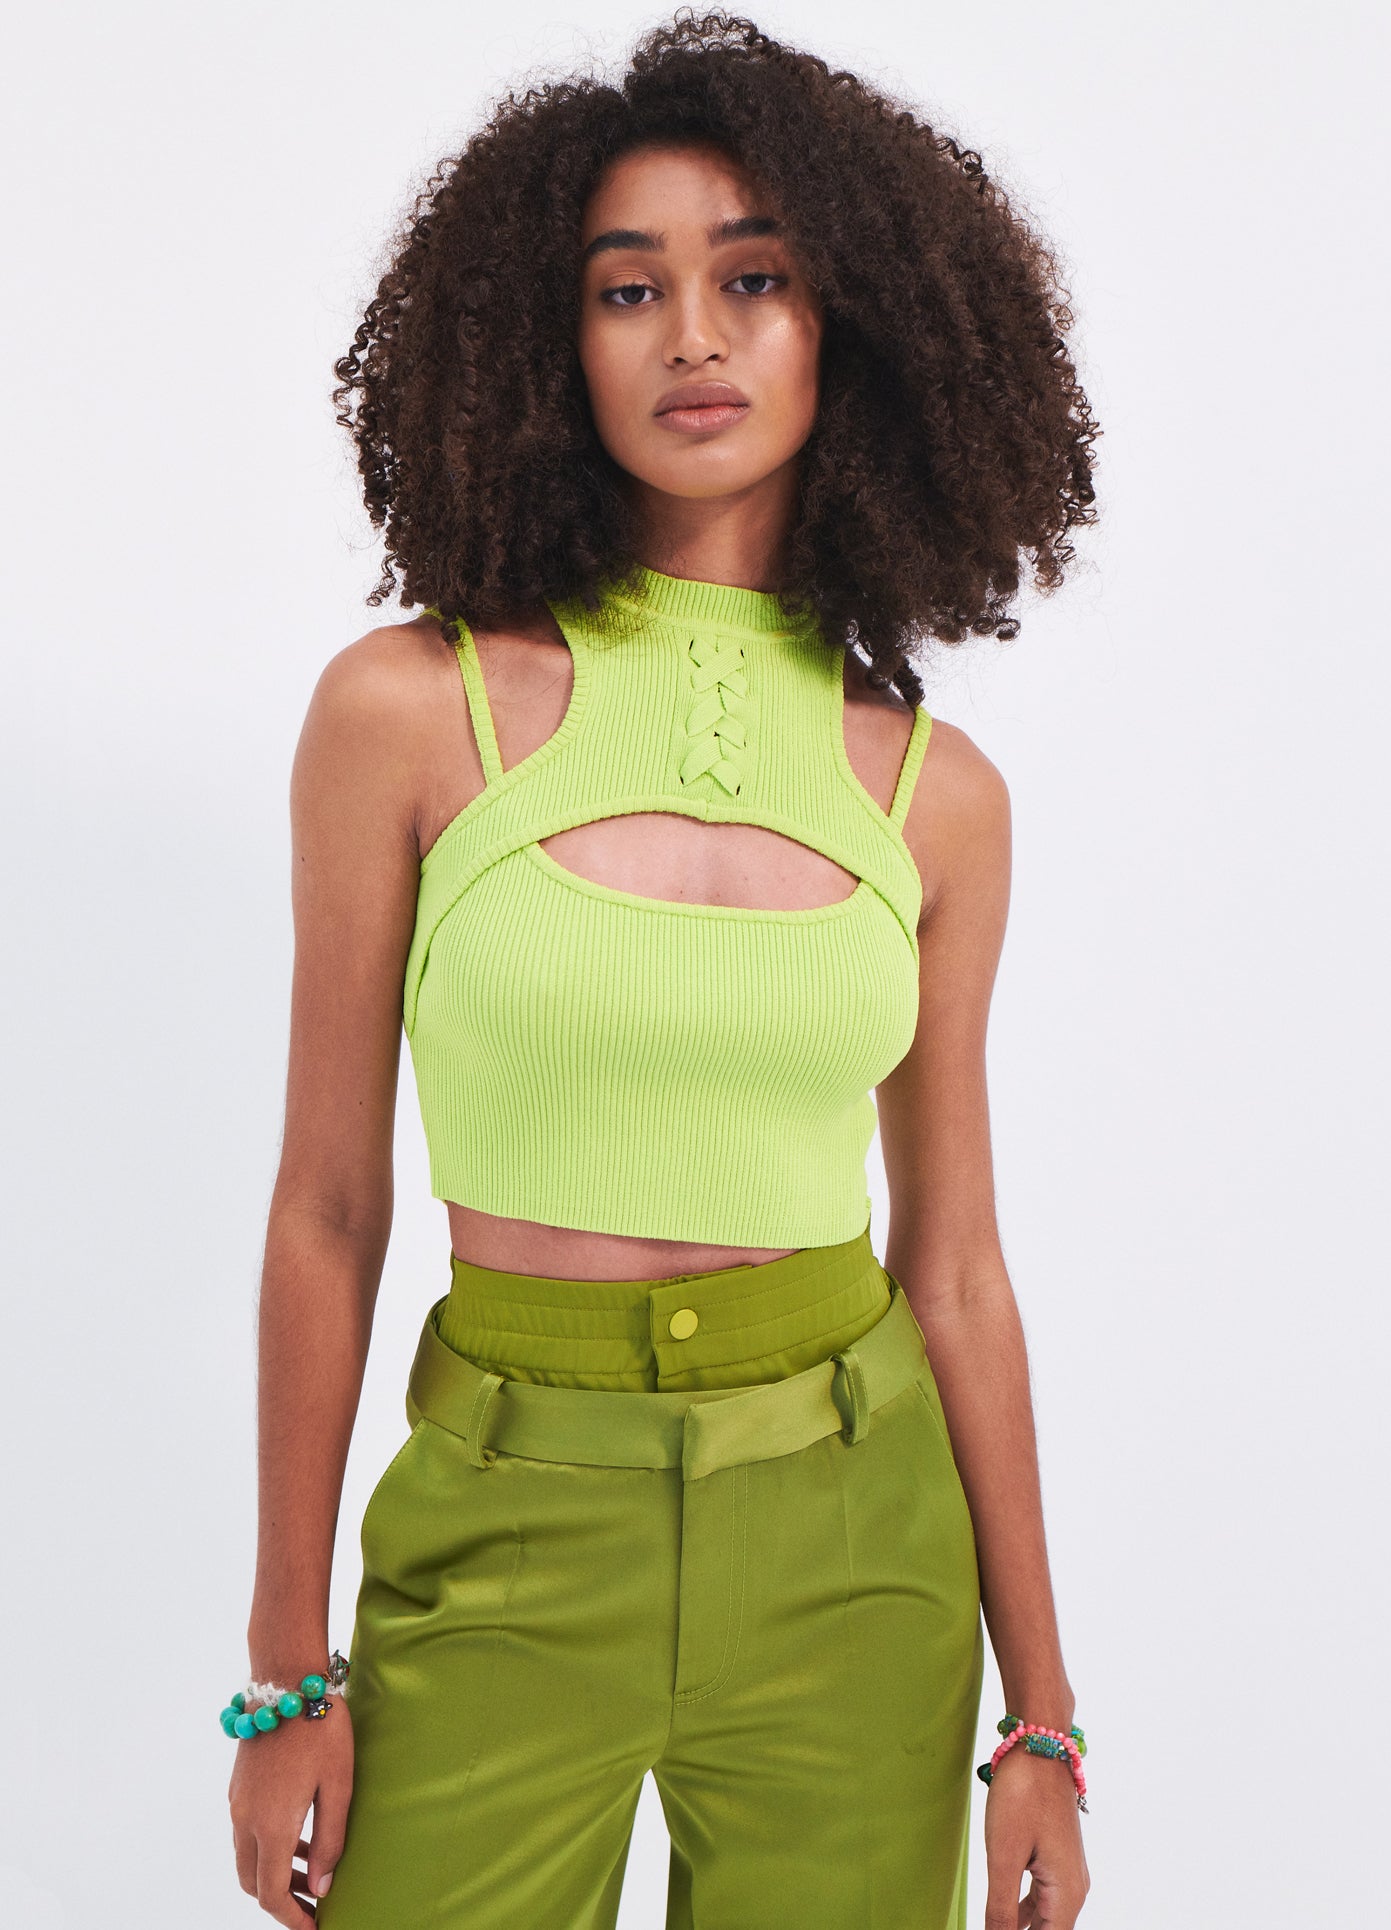 MONSE Halter Neck Knit Cropped Top in Neon Green on model front view